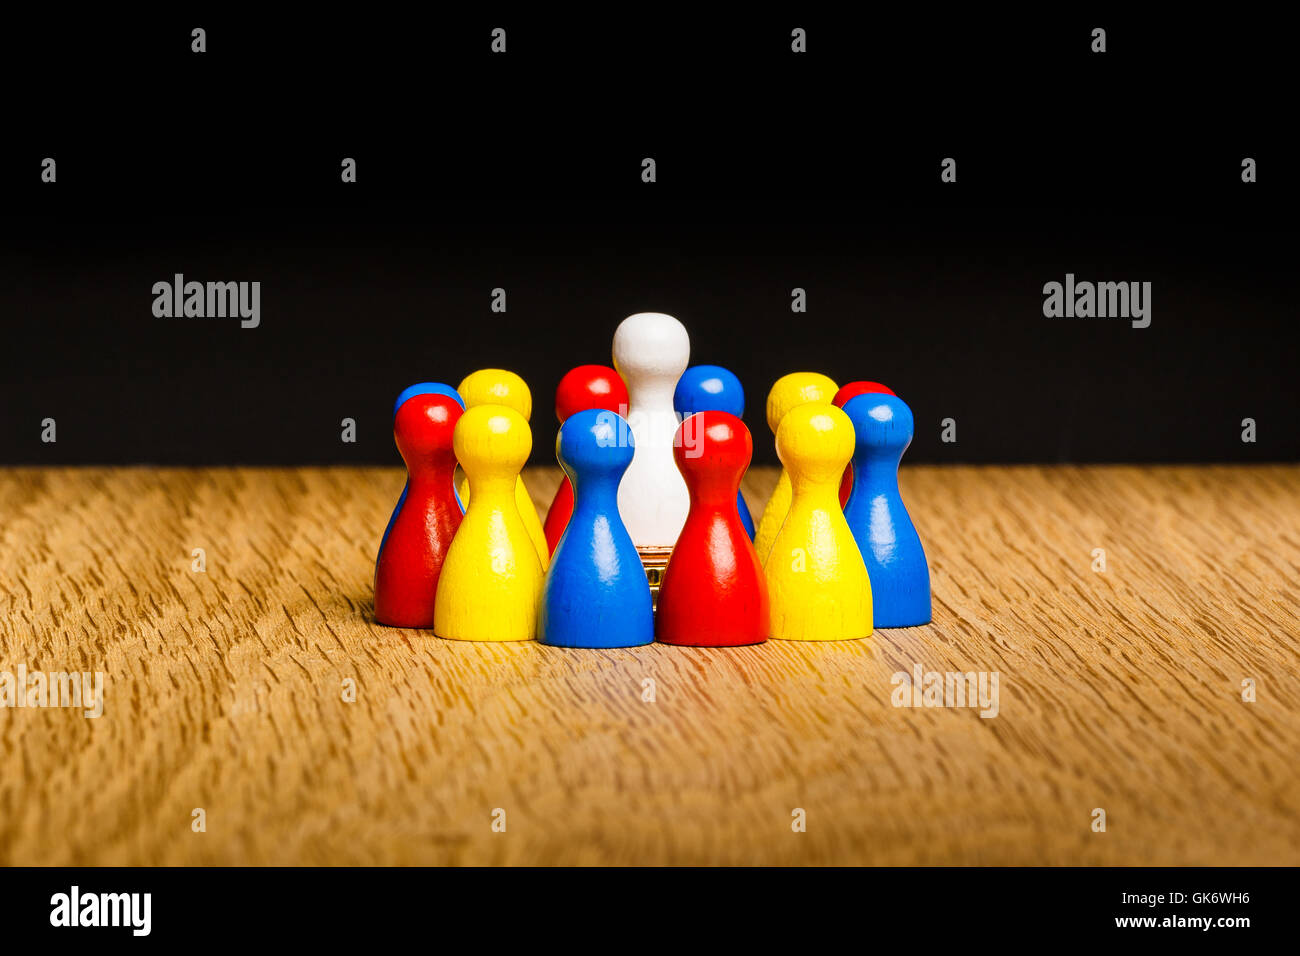 Concept: leader, leadership and adoration with a circle of pawn figures. With white pawn in center and colorful pawn figures aro Stock Photo